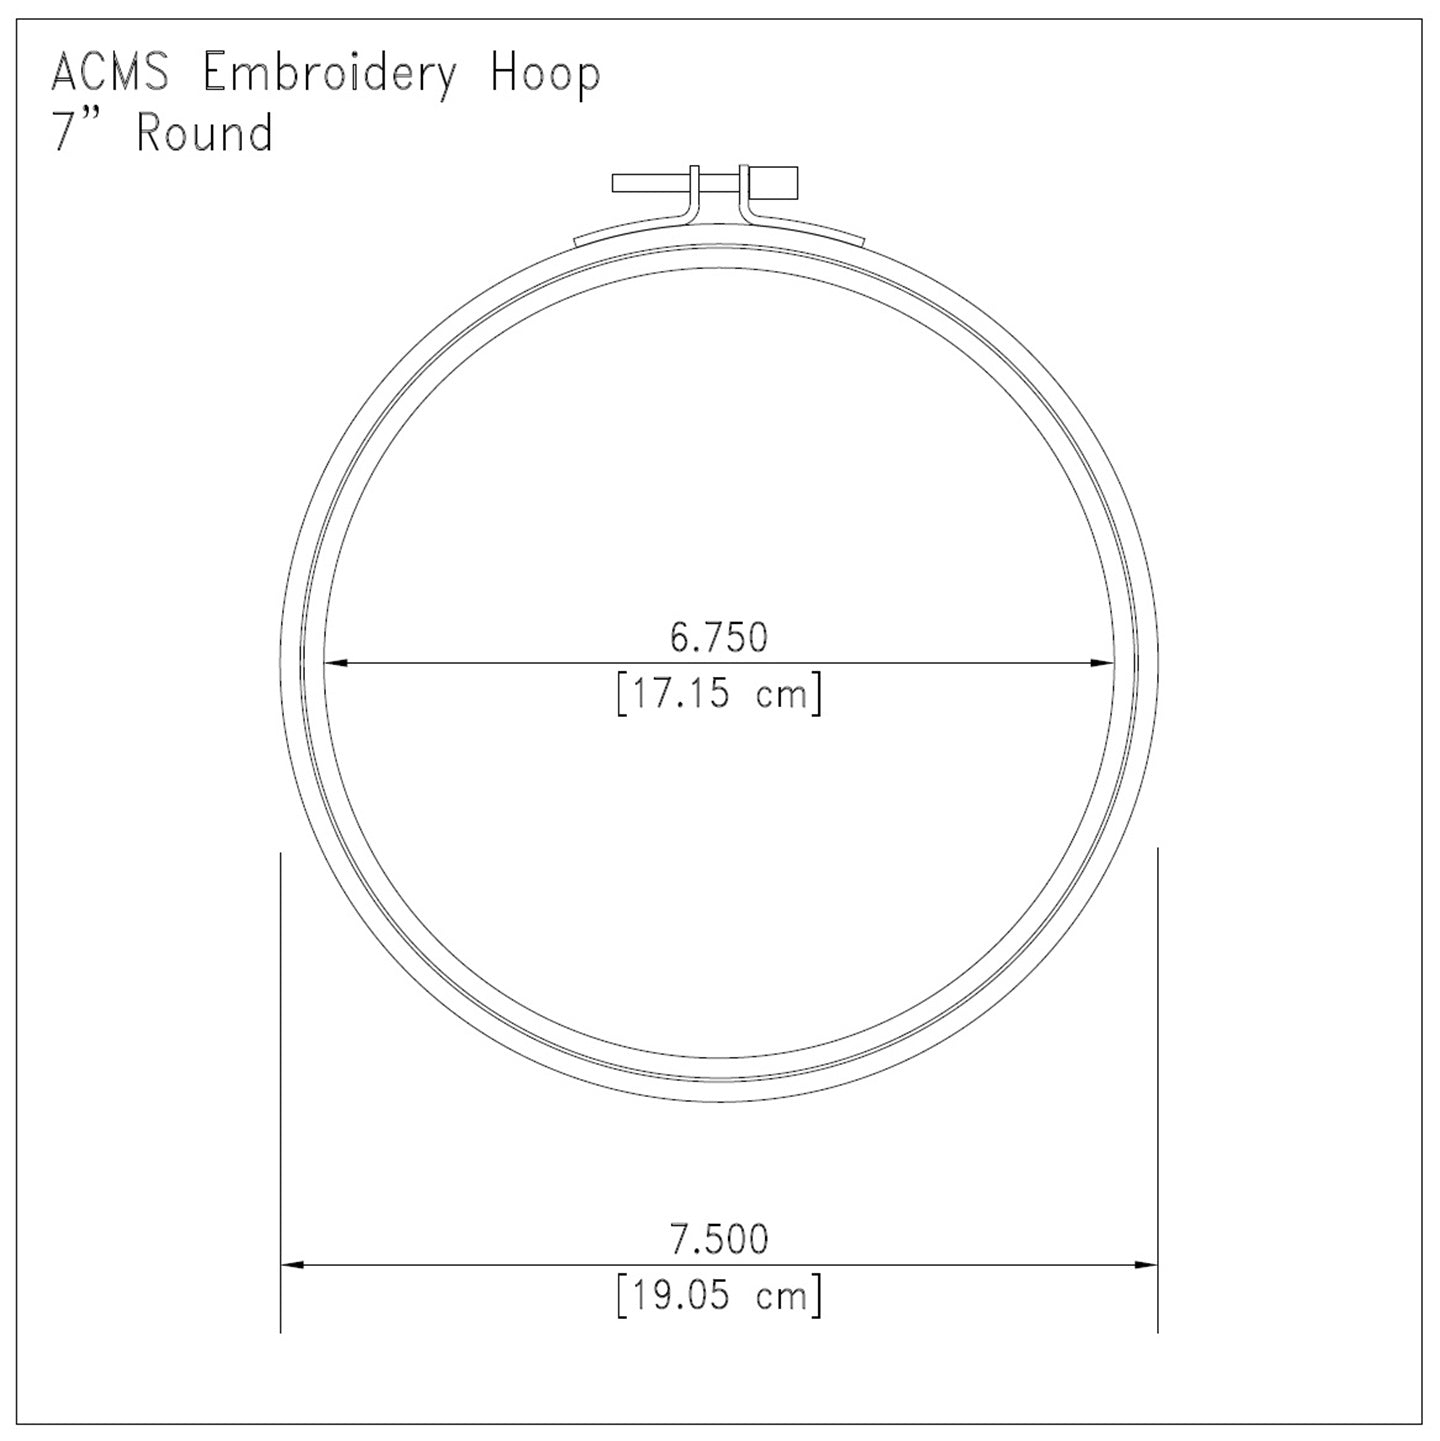 7" Round Embroidery Hoops